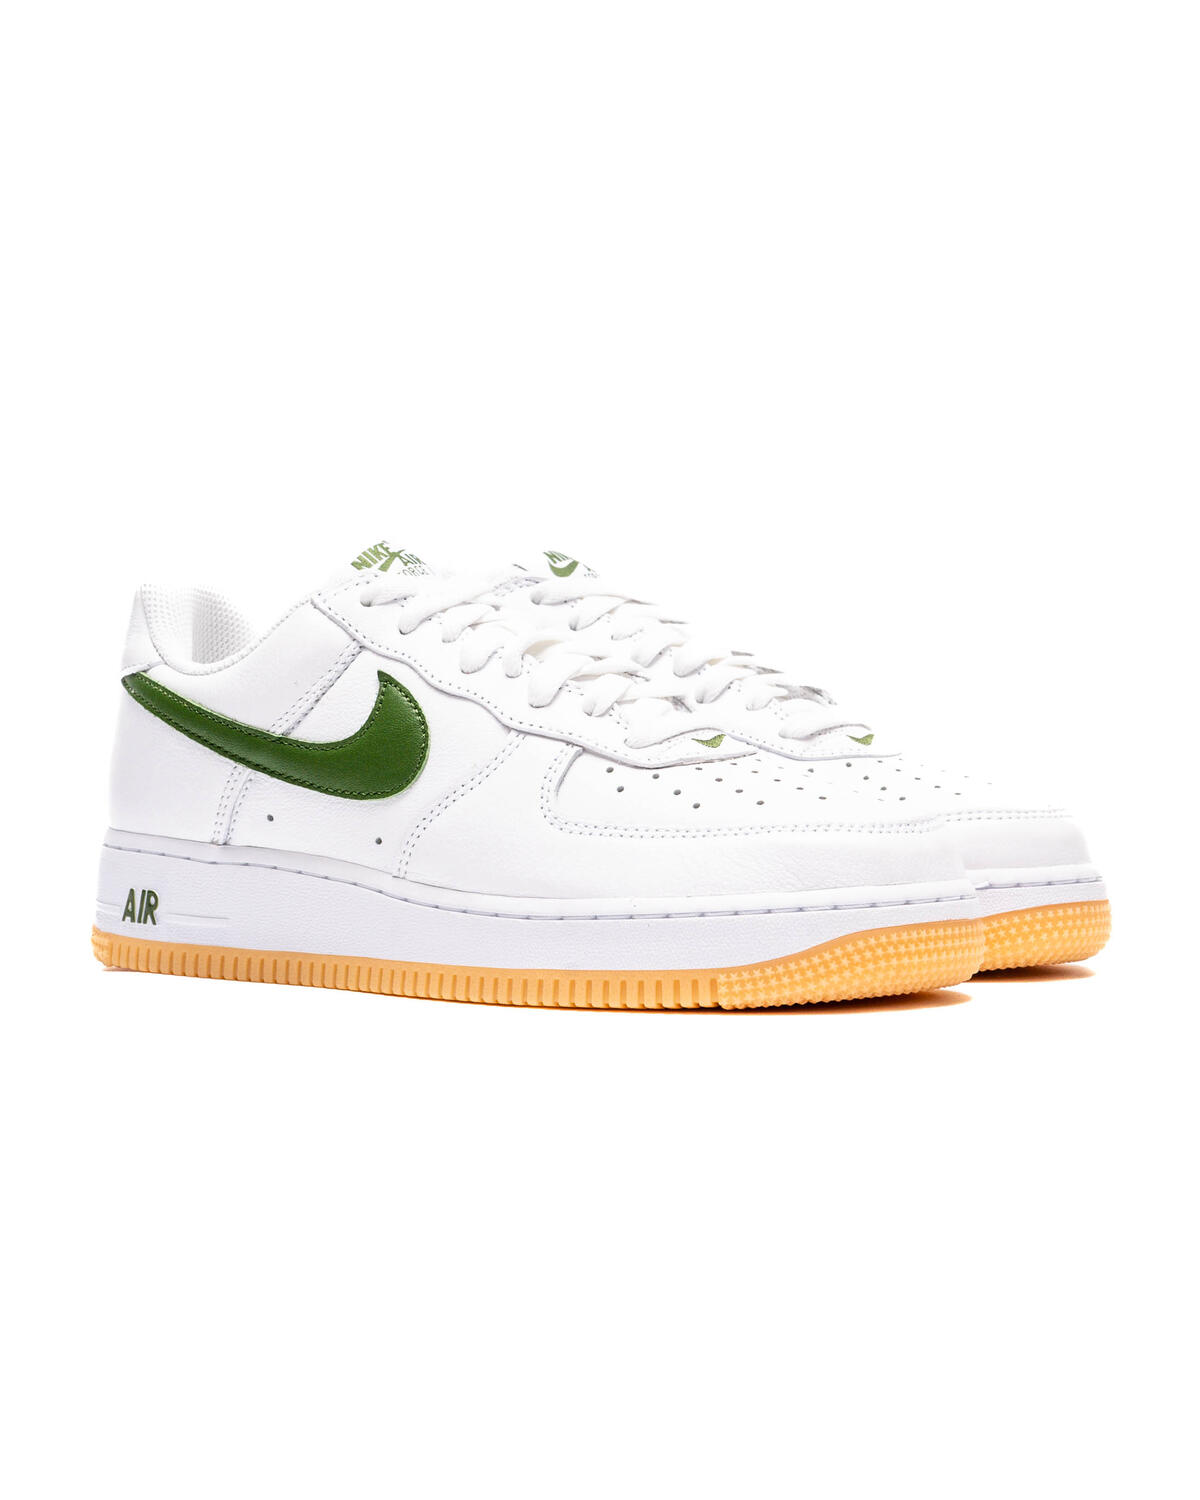 nike men air force 1 low retro qs white forest green gum yellow